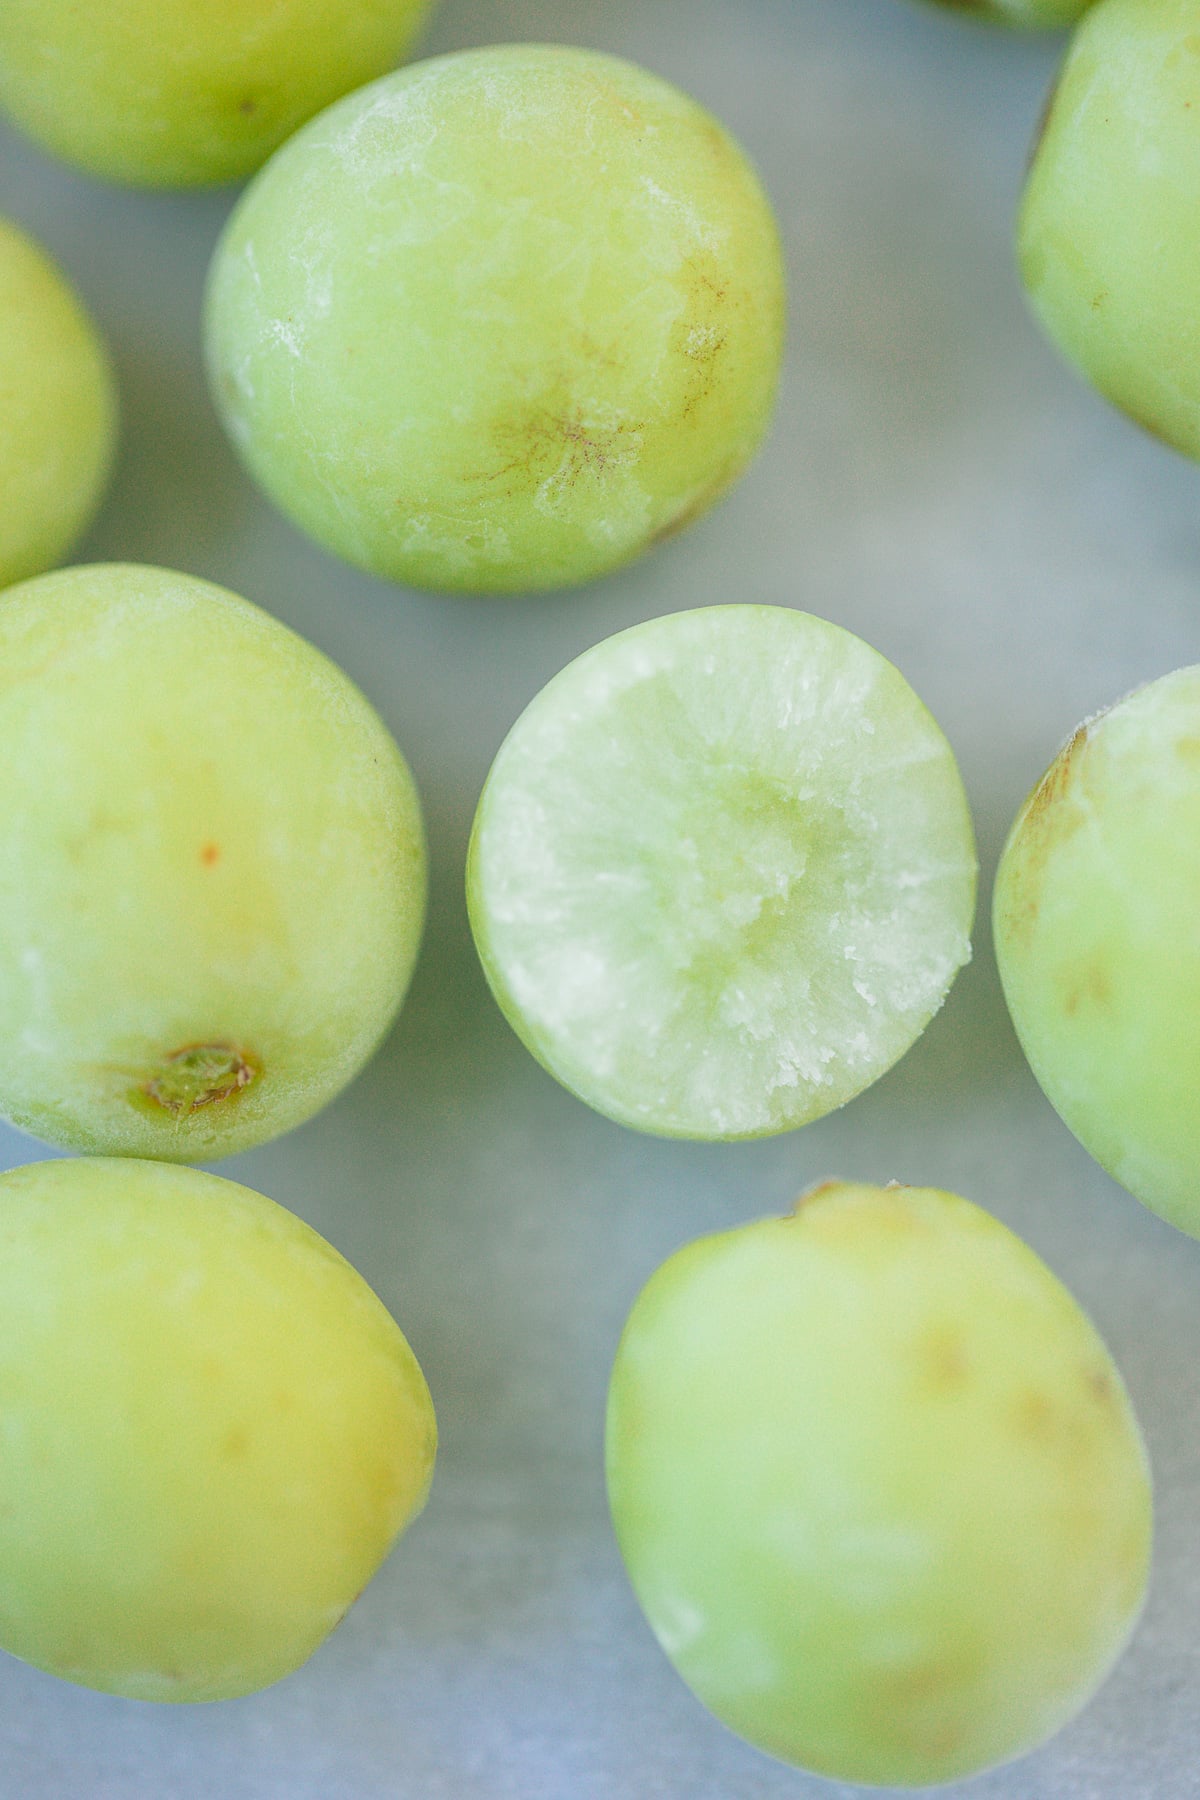 frozen green grapes ready to eat.